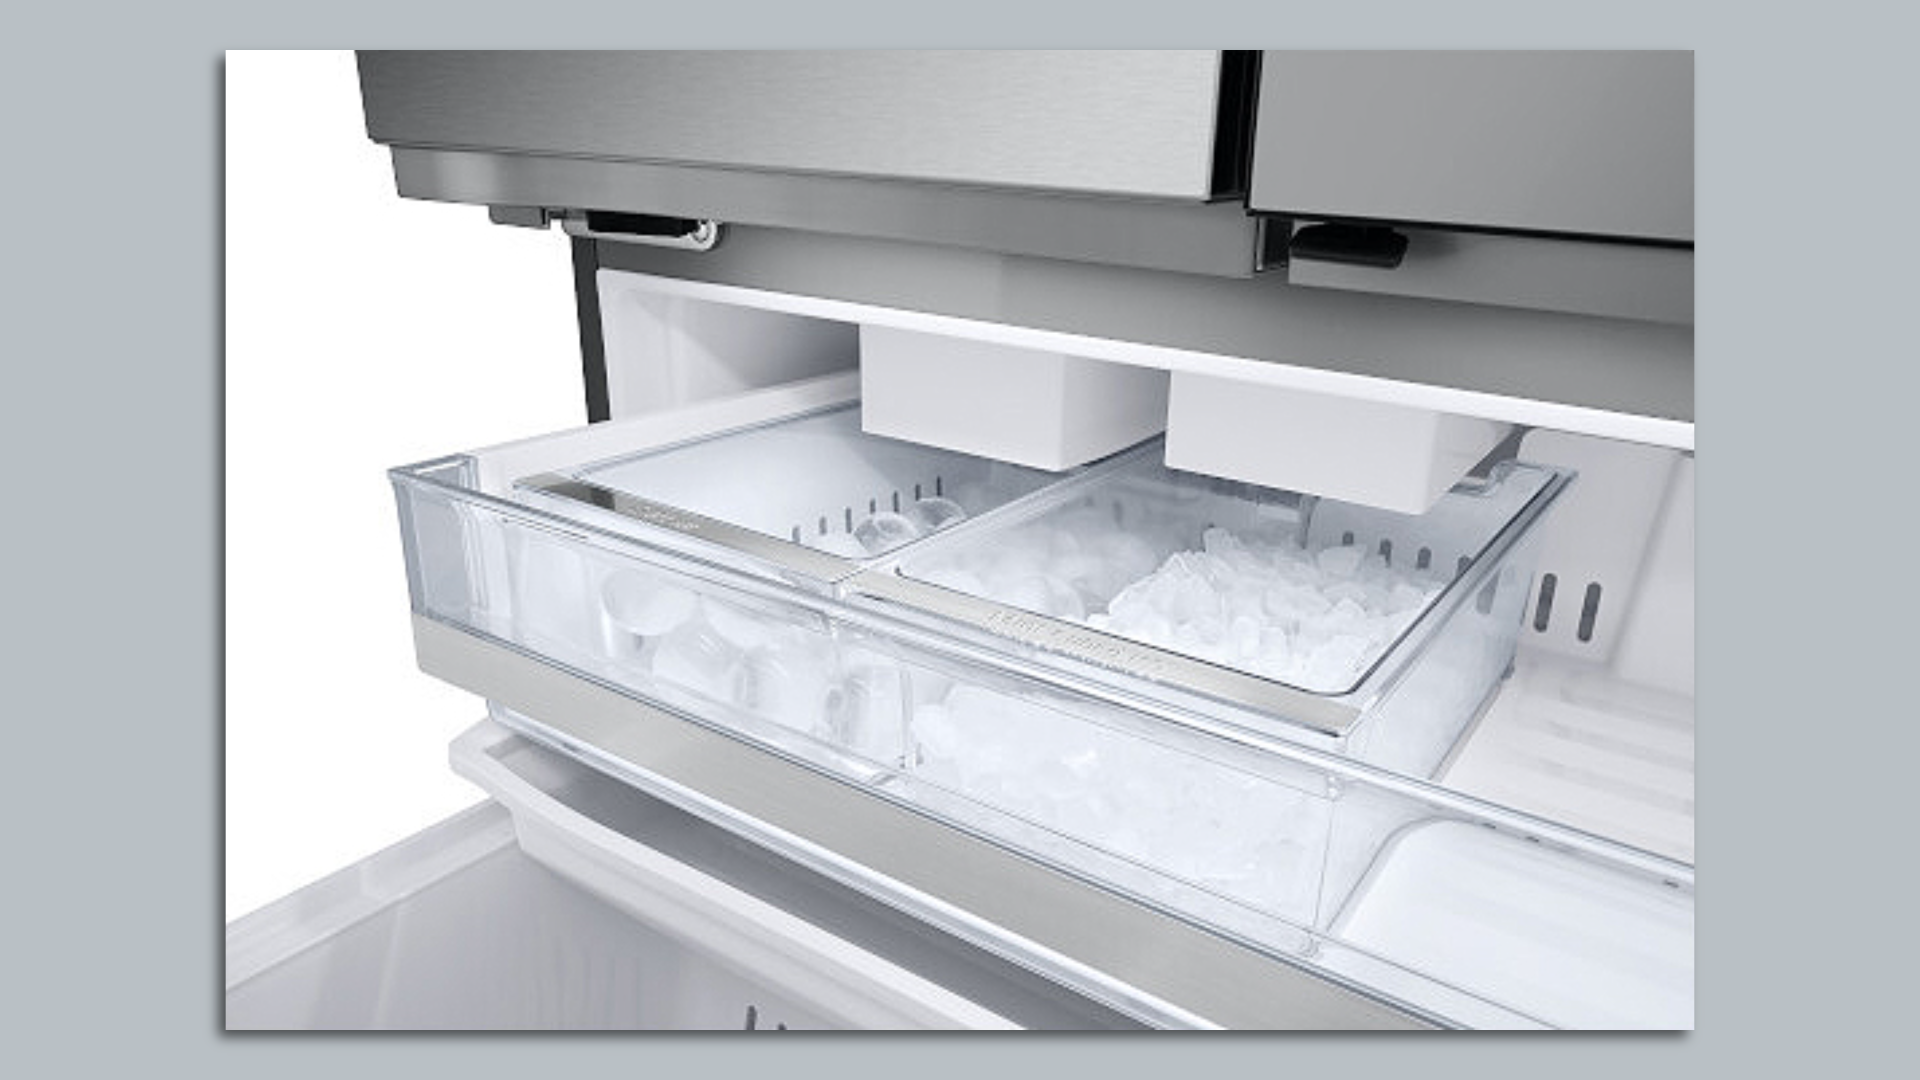 The ice cube tray of an LG refrigerator, with large round cubes in one drawer and mini cubes in another.